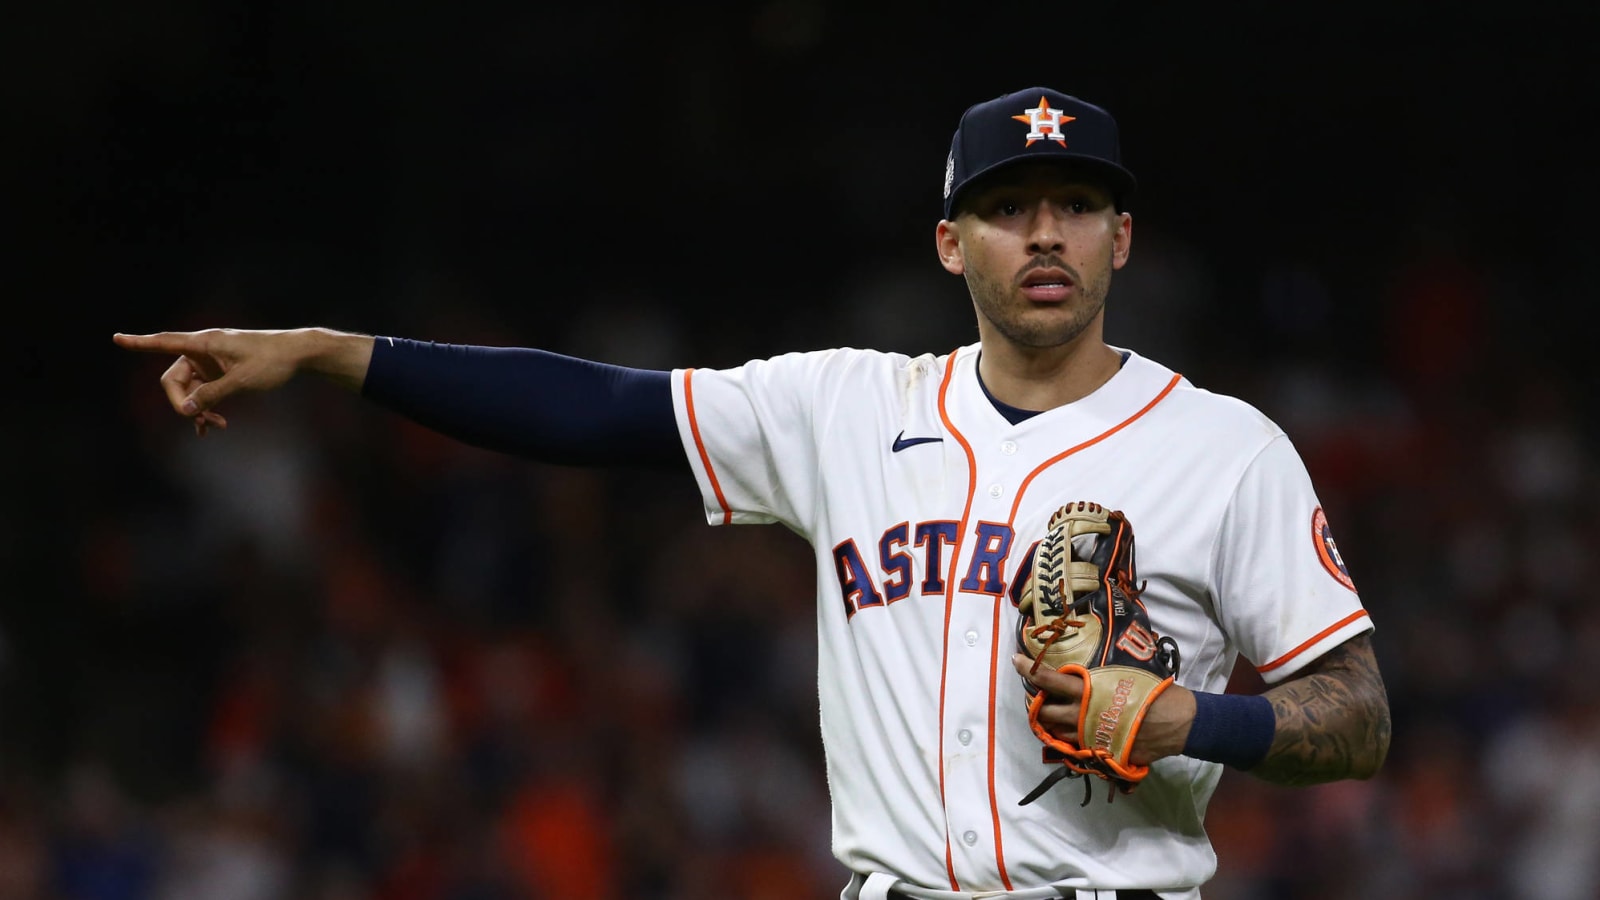 Carlos Correa: Derek Jeter did not deserve any of his Gold Gloves